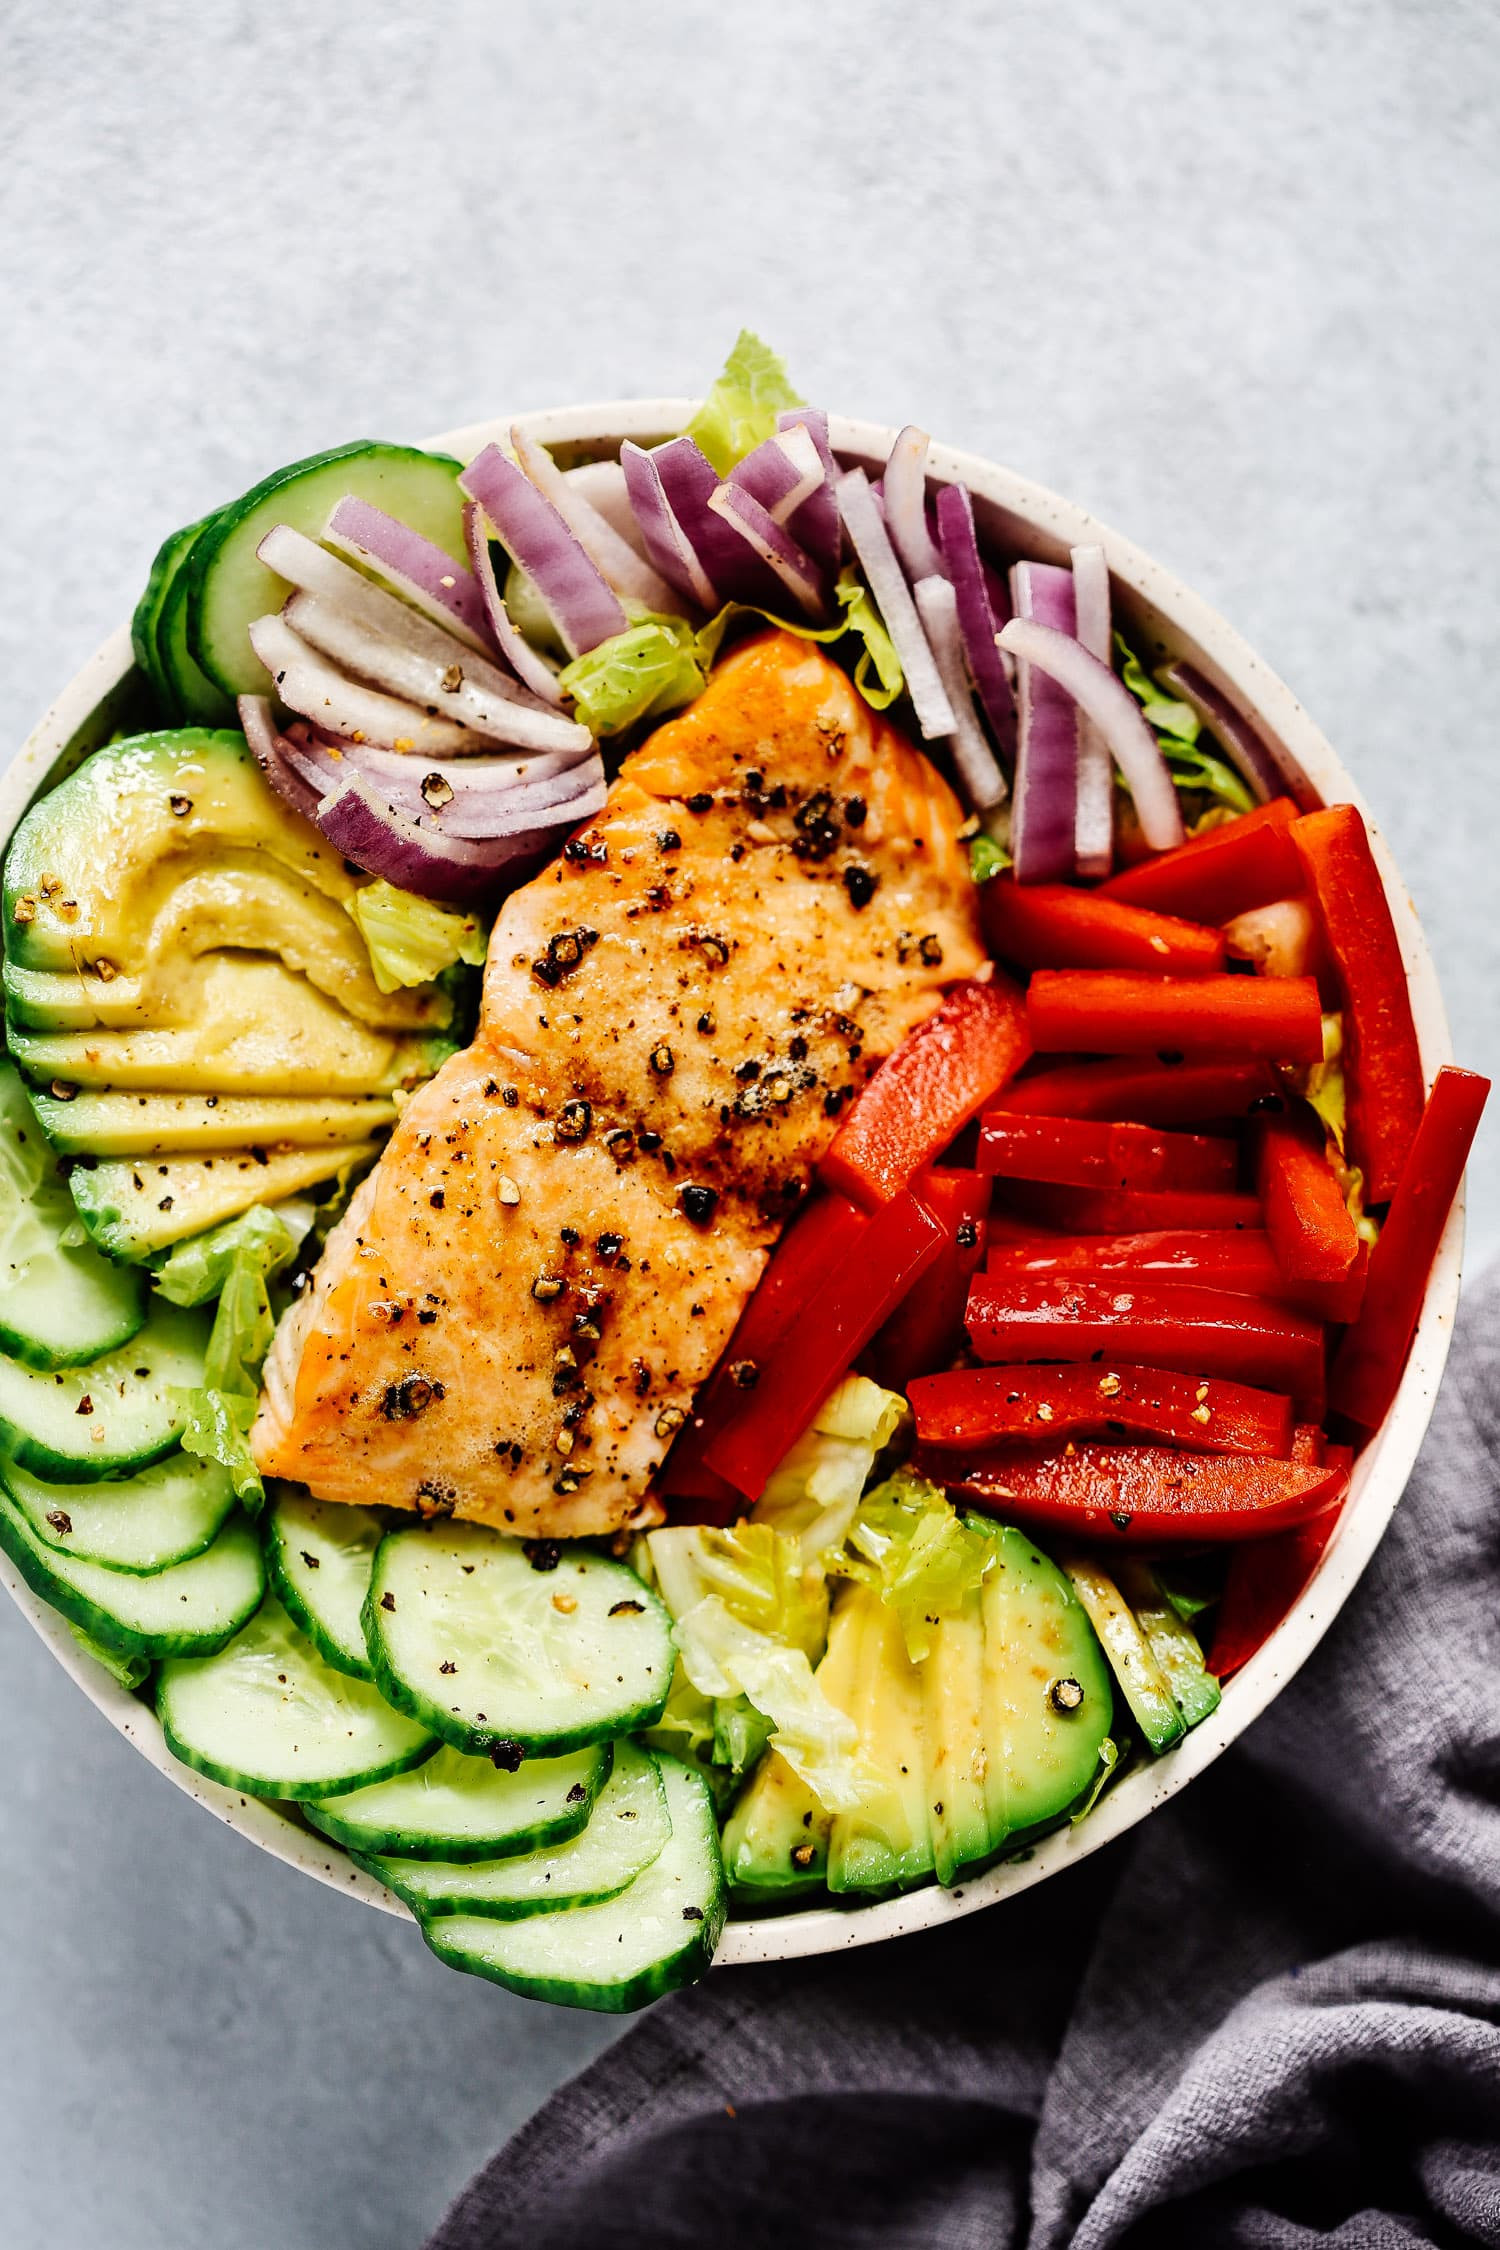 Recipe For Salmon Salad
 Easy Salmon Salad Recipe Healthy Lunch for Busy Days